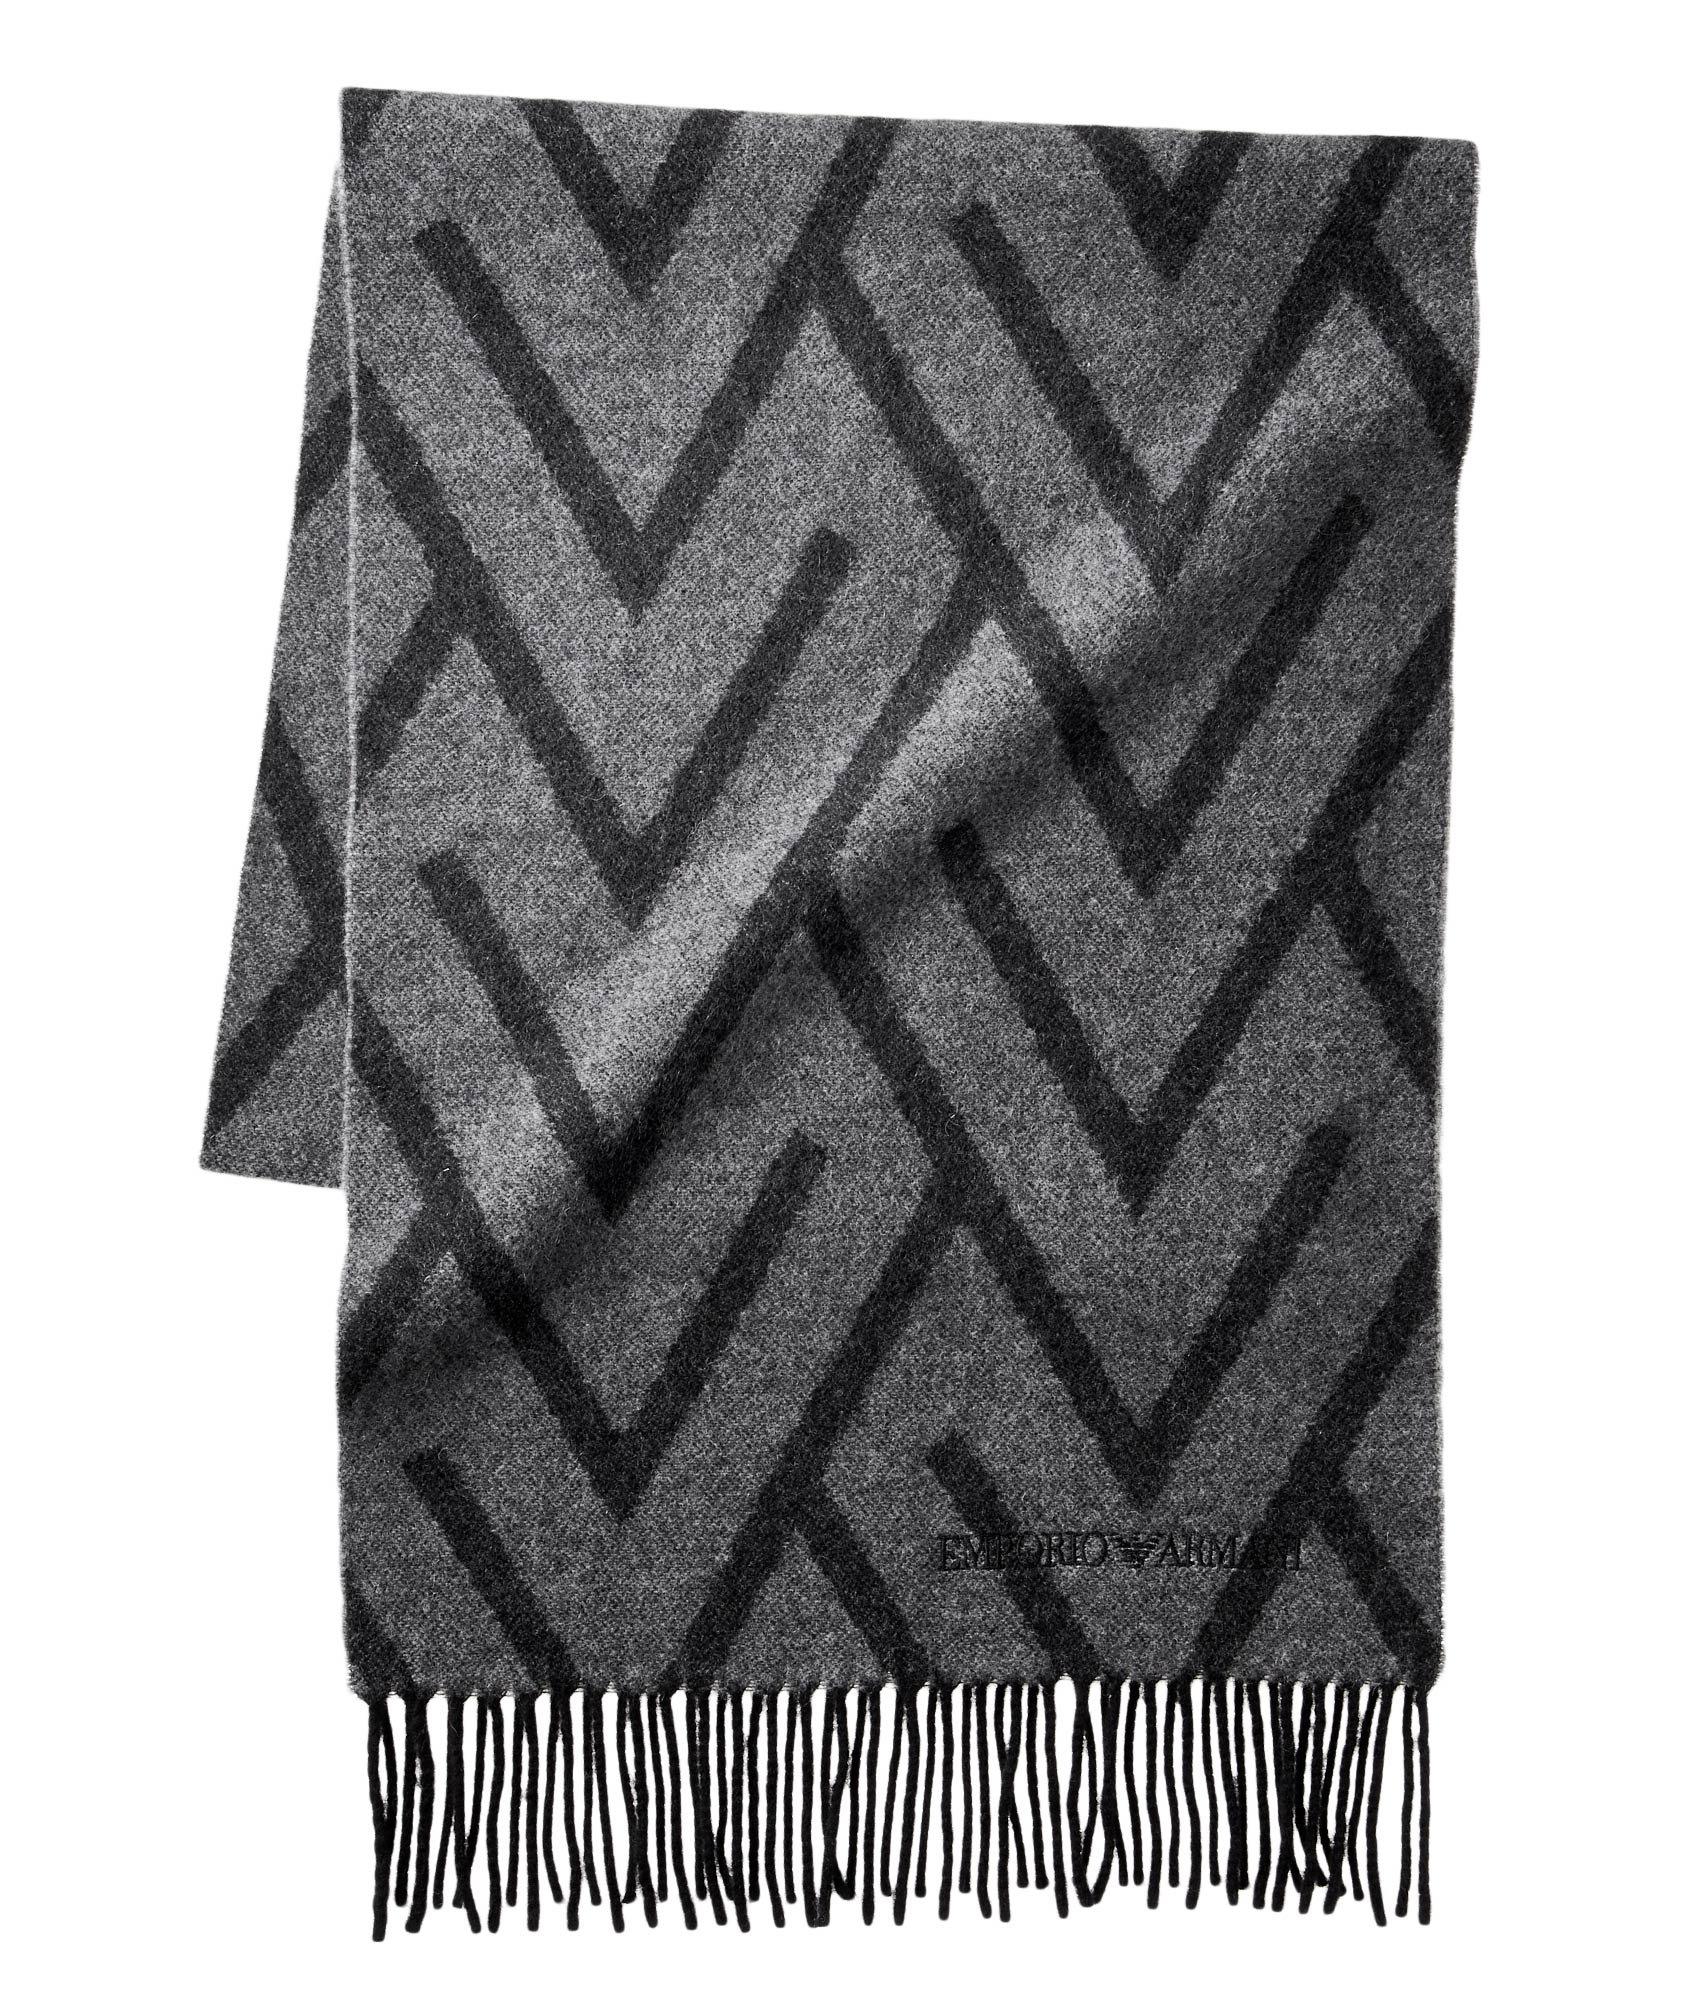 Printed Wool-Cashmere Scarf image 0